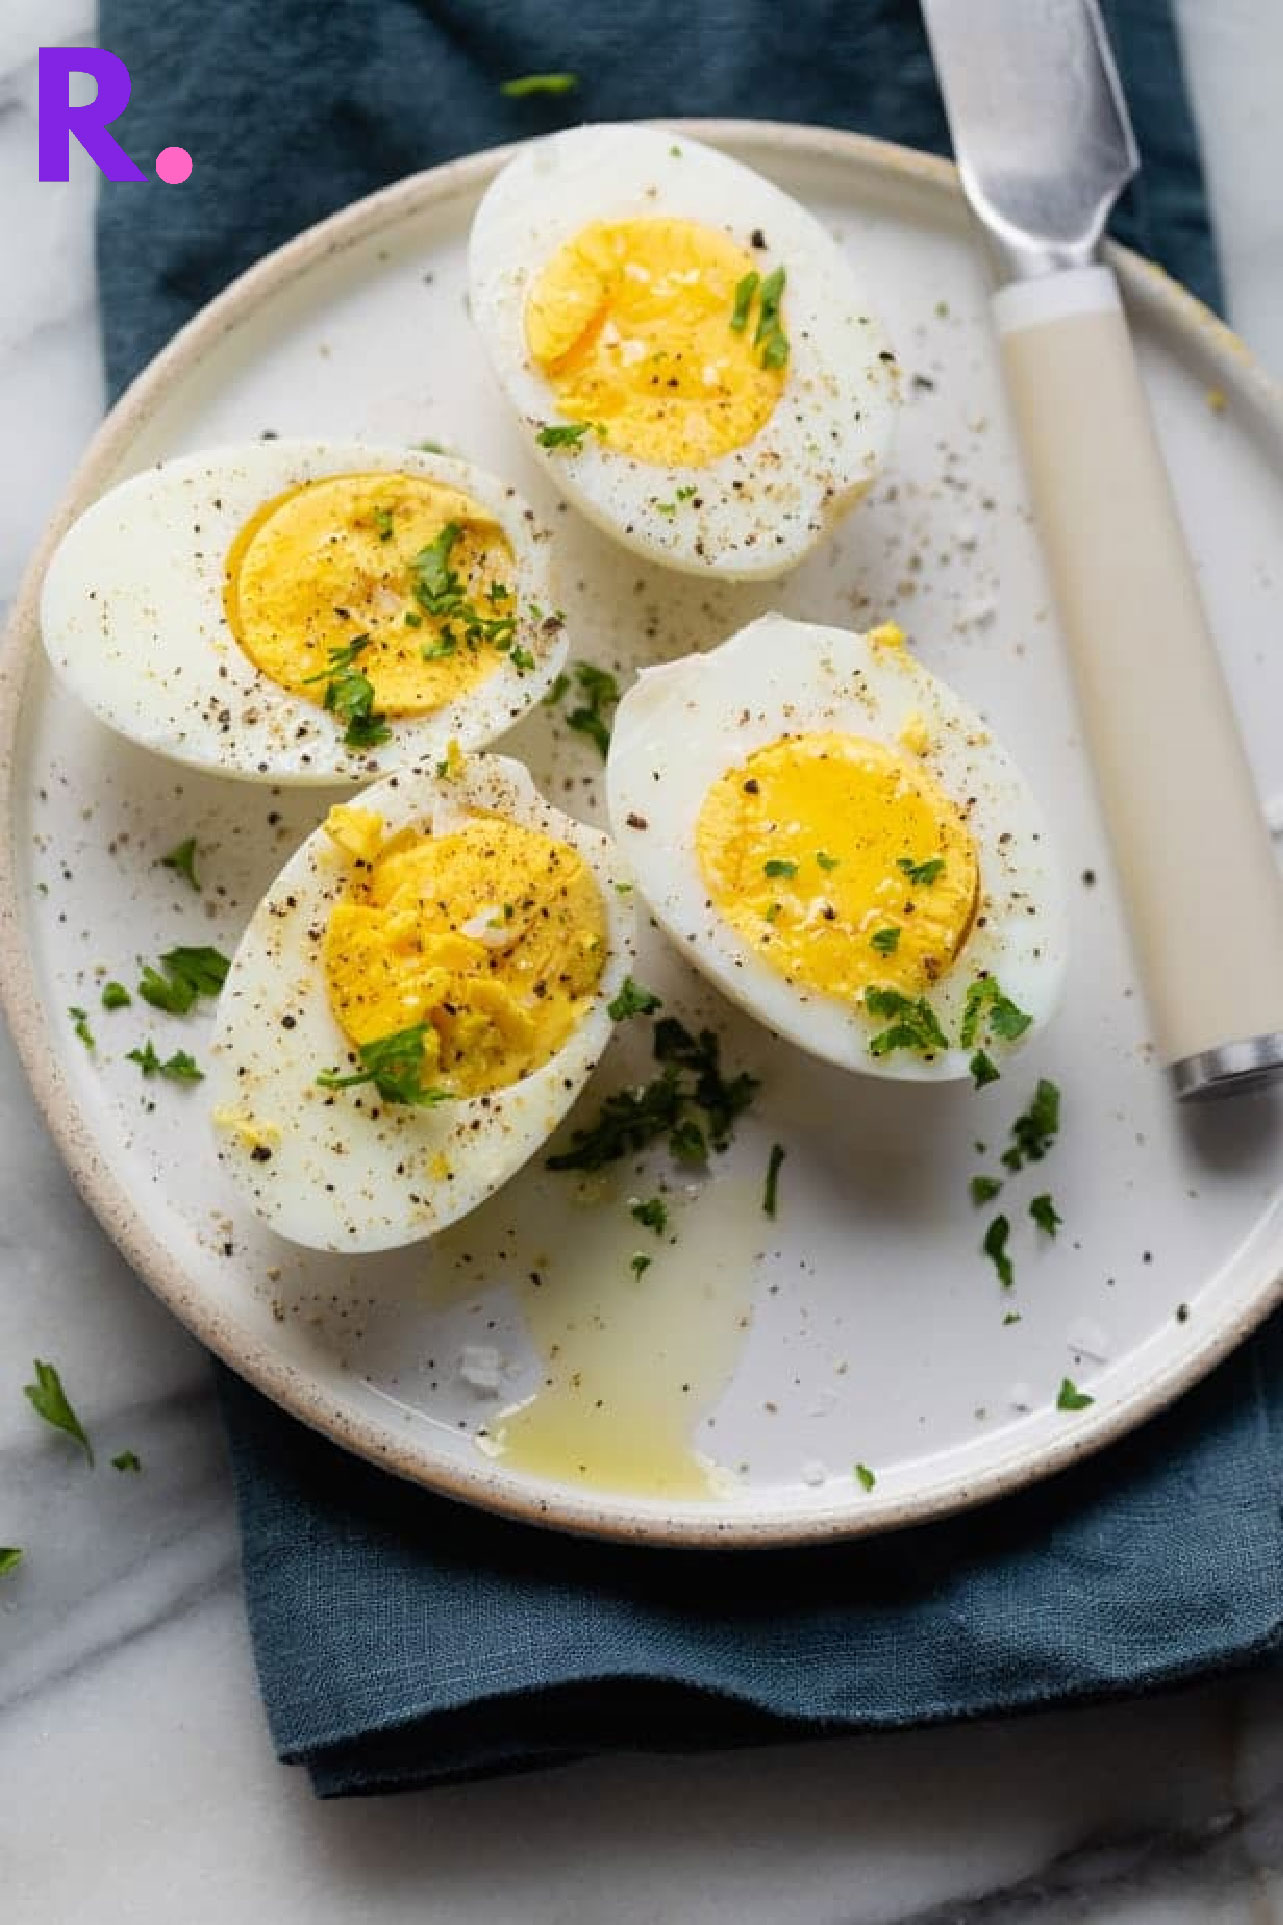 benefits of boiled eggs